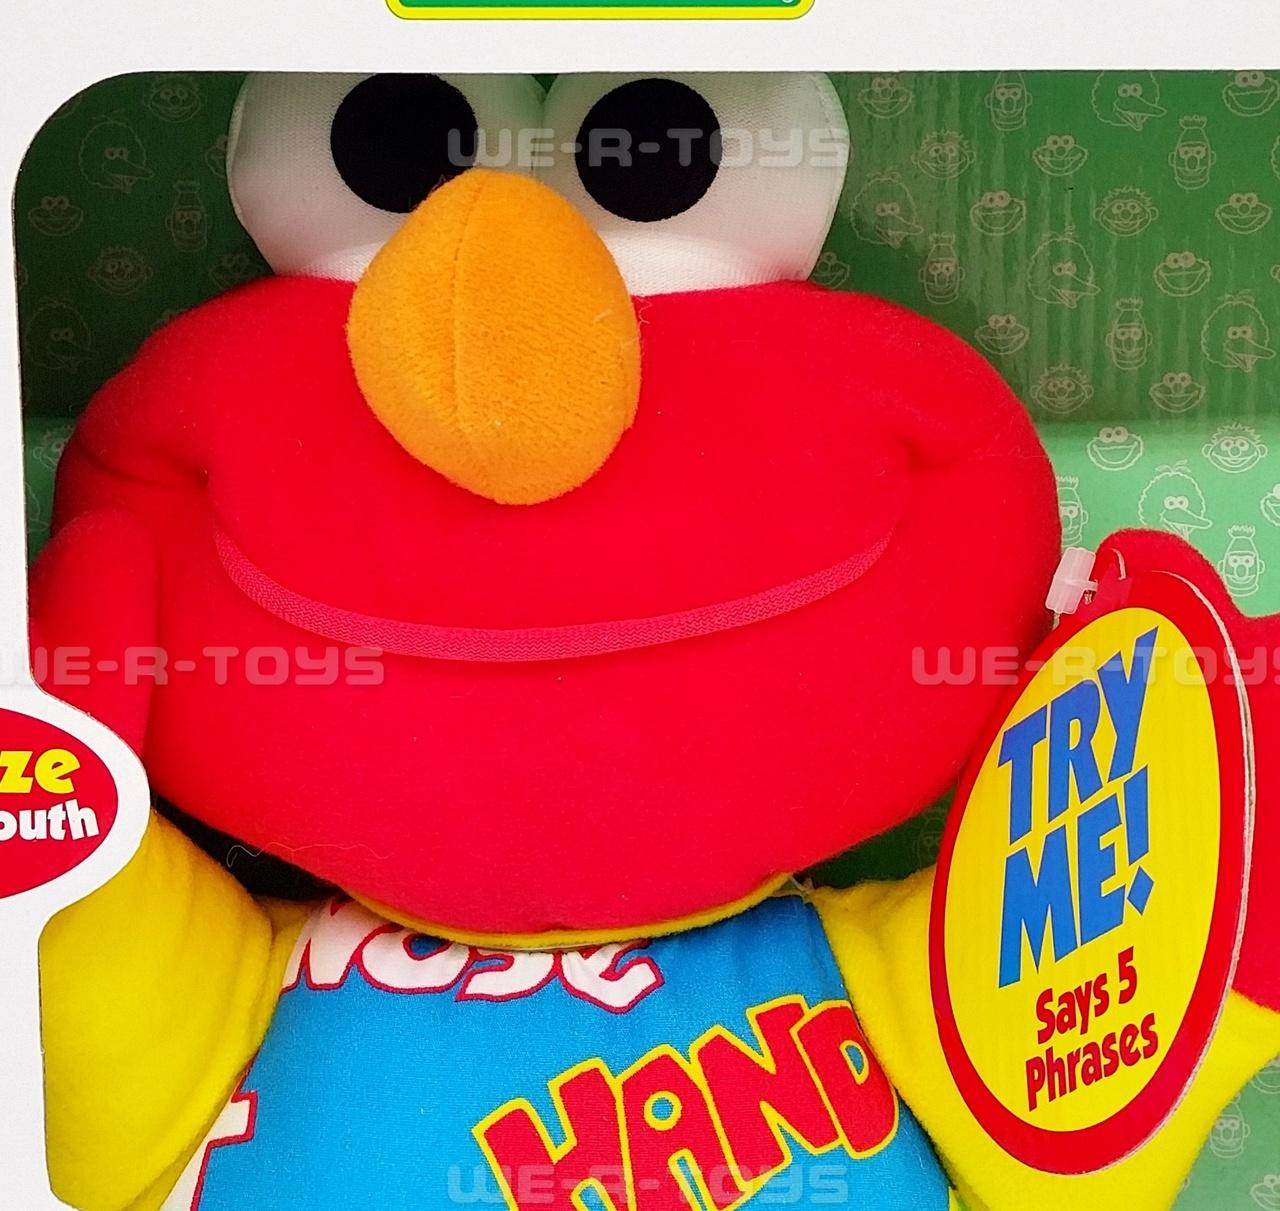 Play Doh Color Mixer Learn Colors as Elmo Talks With Cookie